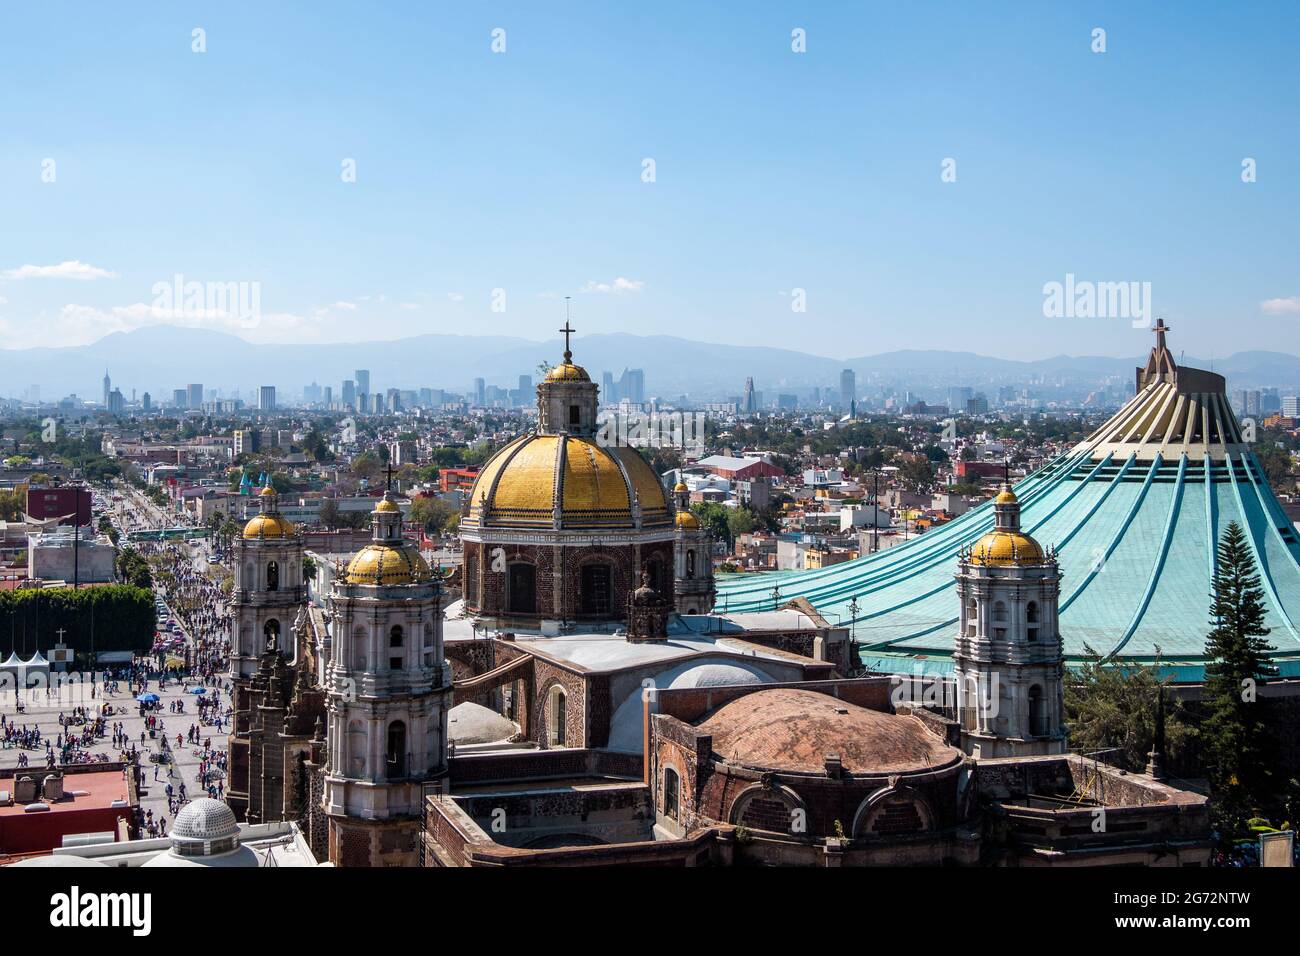 Historical landmark Basilica of Our Lady of Guadalupe and Mexico City skyline on a sunny day, Mexico. Stock Photo